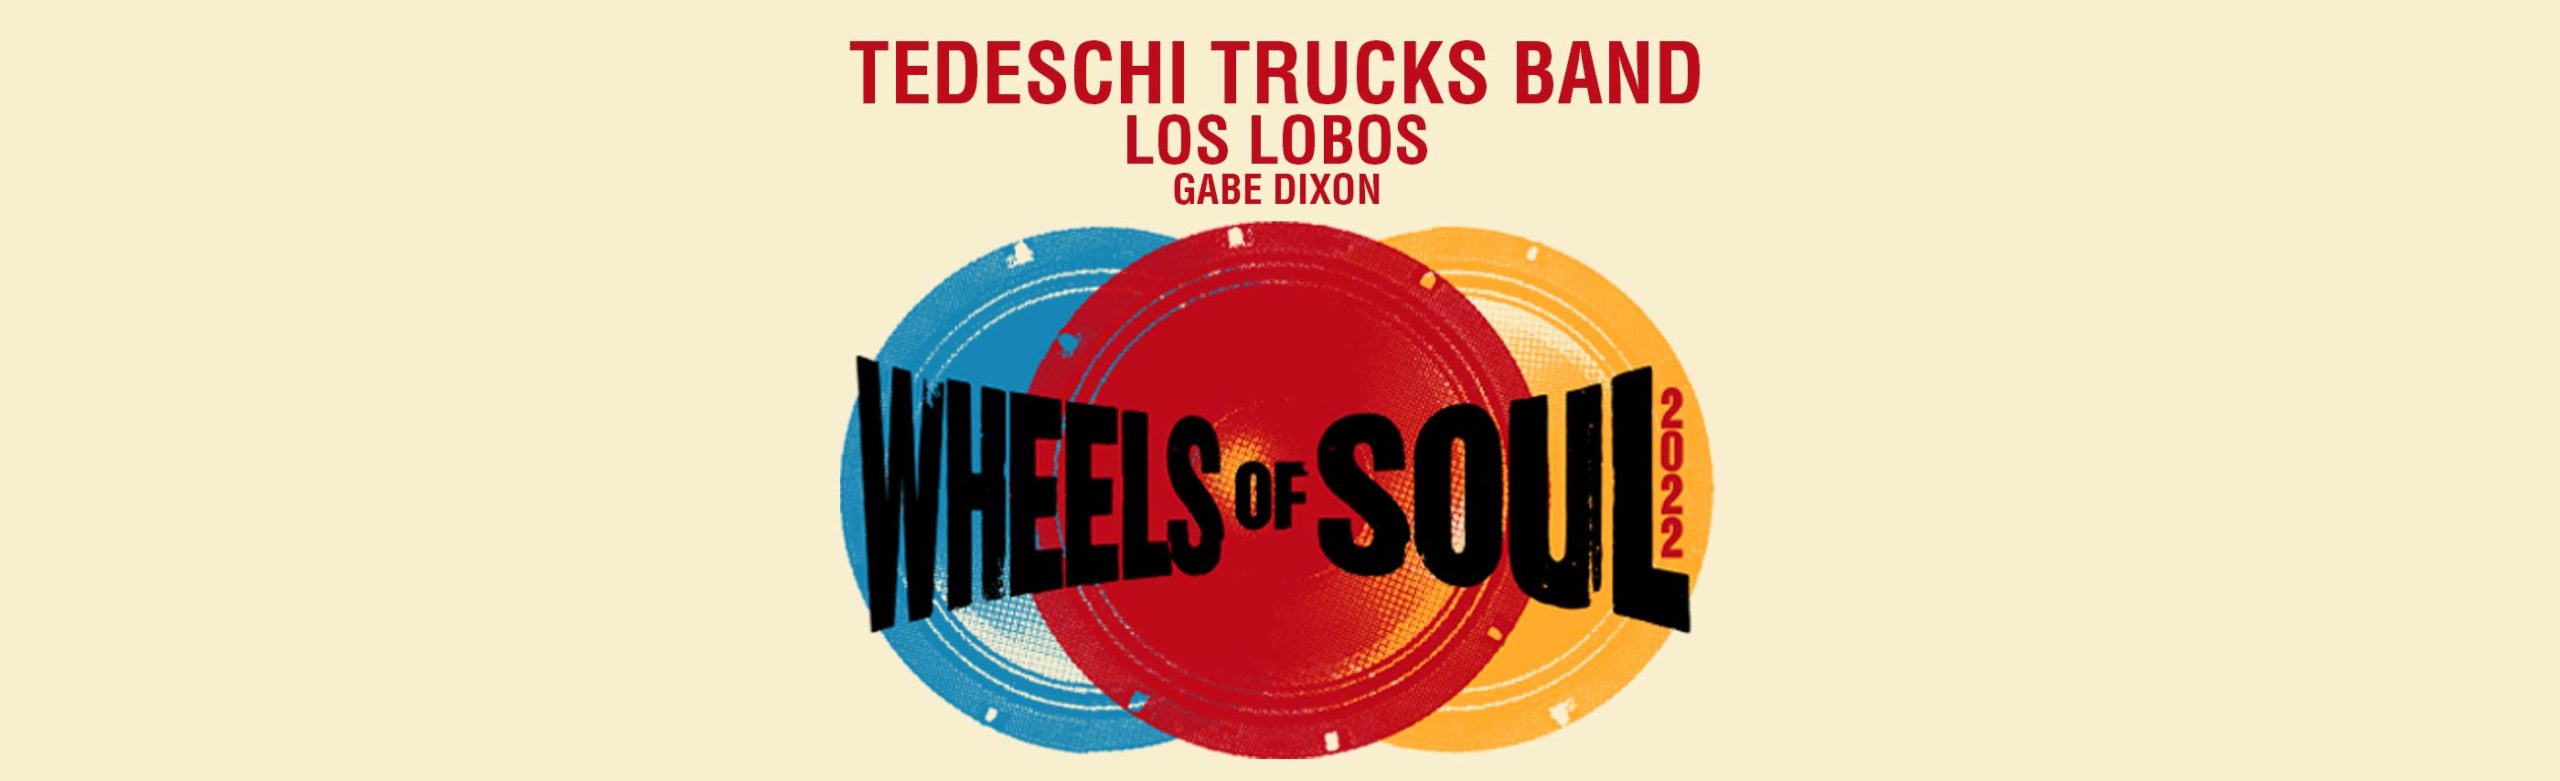 Tedeschi Trucks Band Will Return to KettleHouse Amphitheater in 2022 with Los Lobos and Gabe Dixon Image